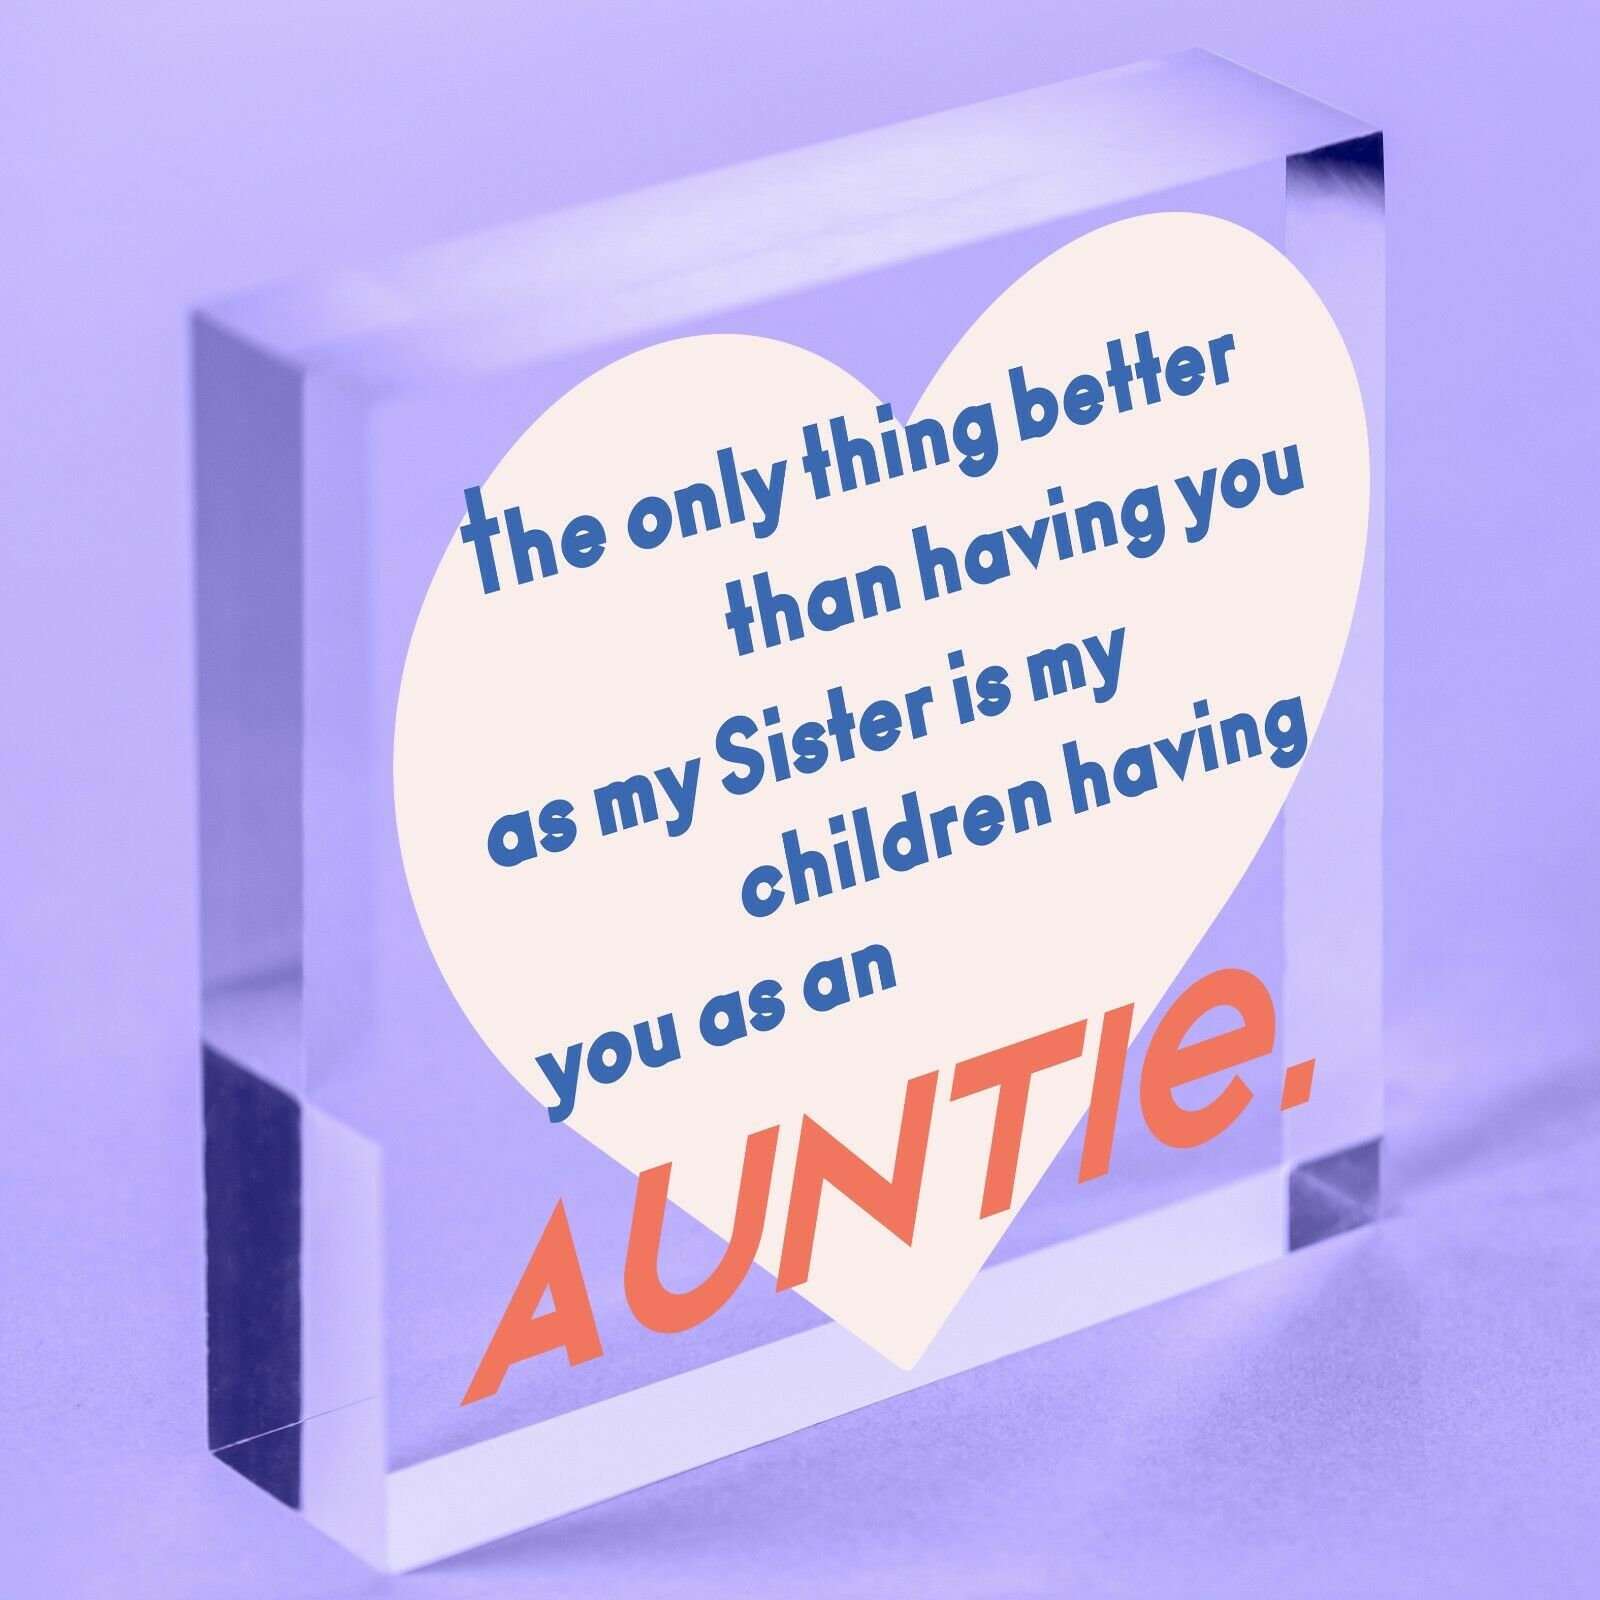 Sister Children Having You As Auntie Gift Acrylic Block Aunt Sign Wedding